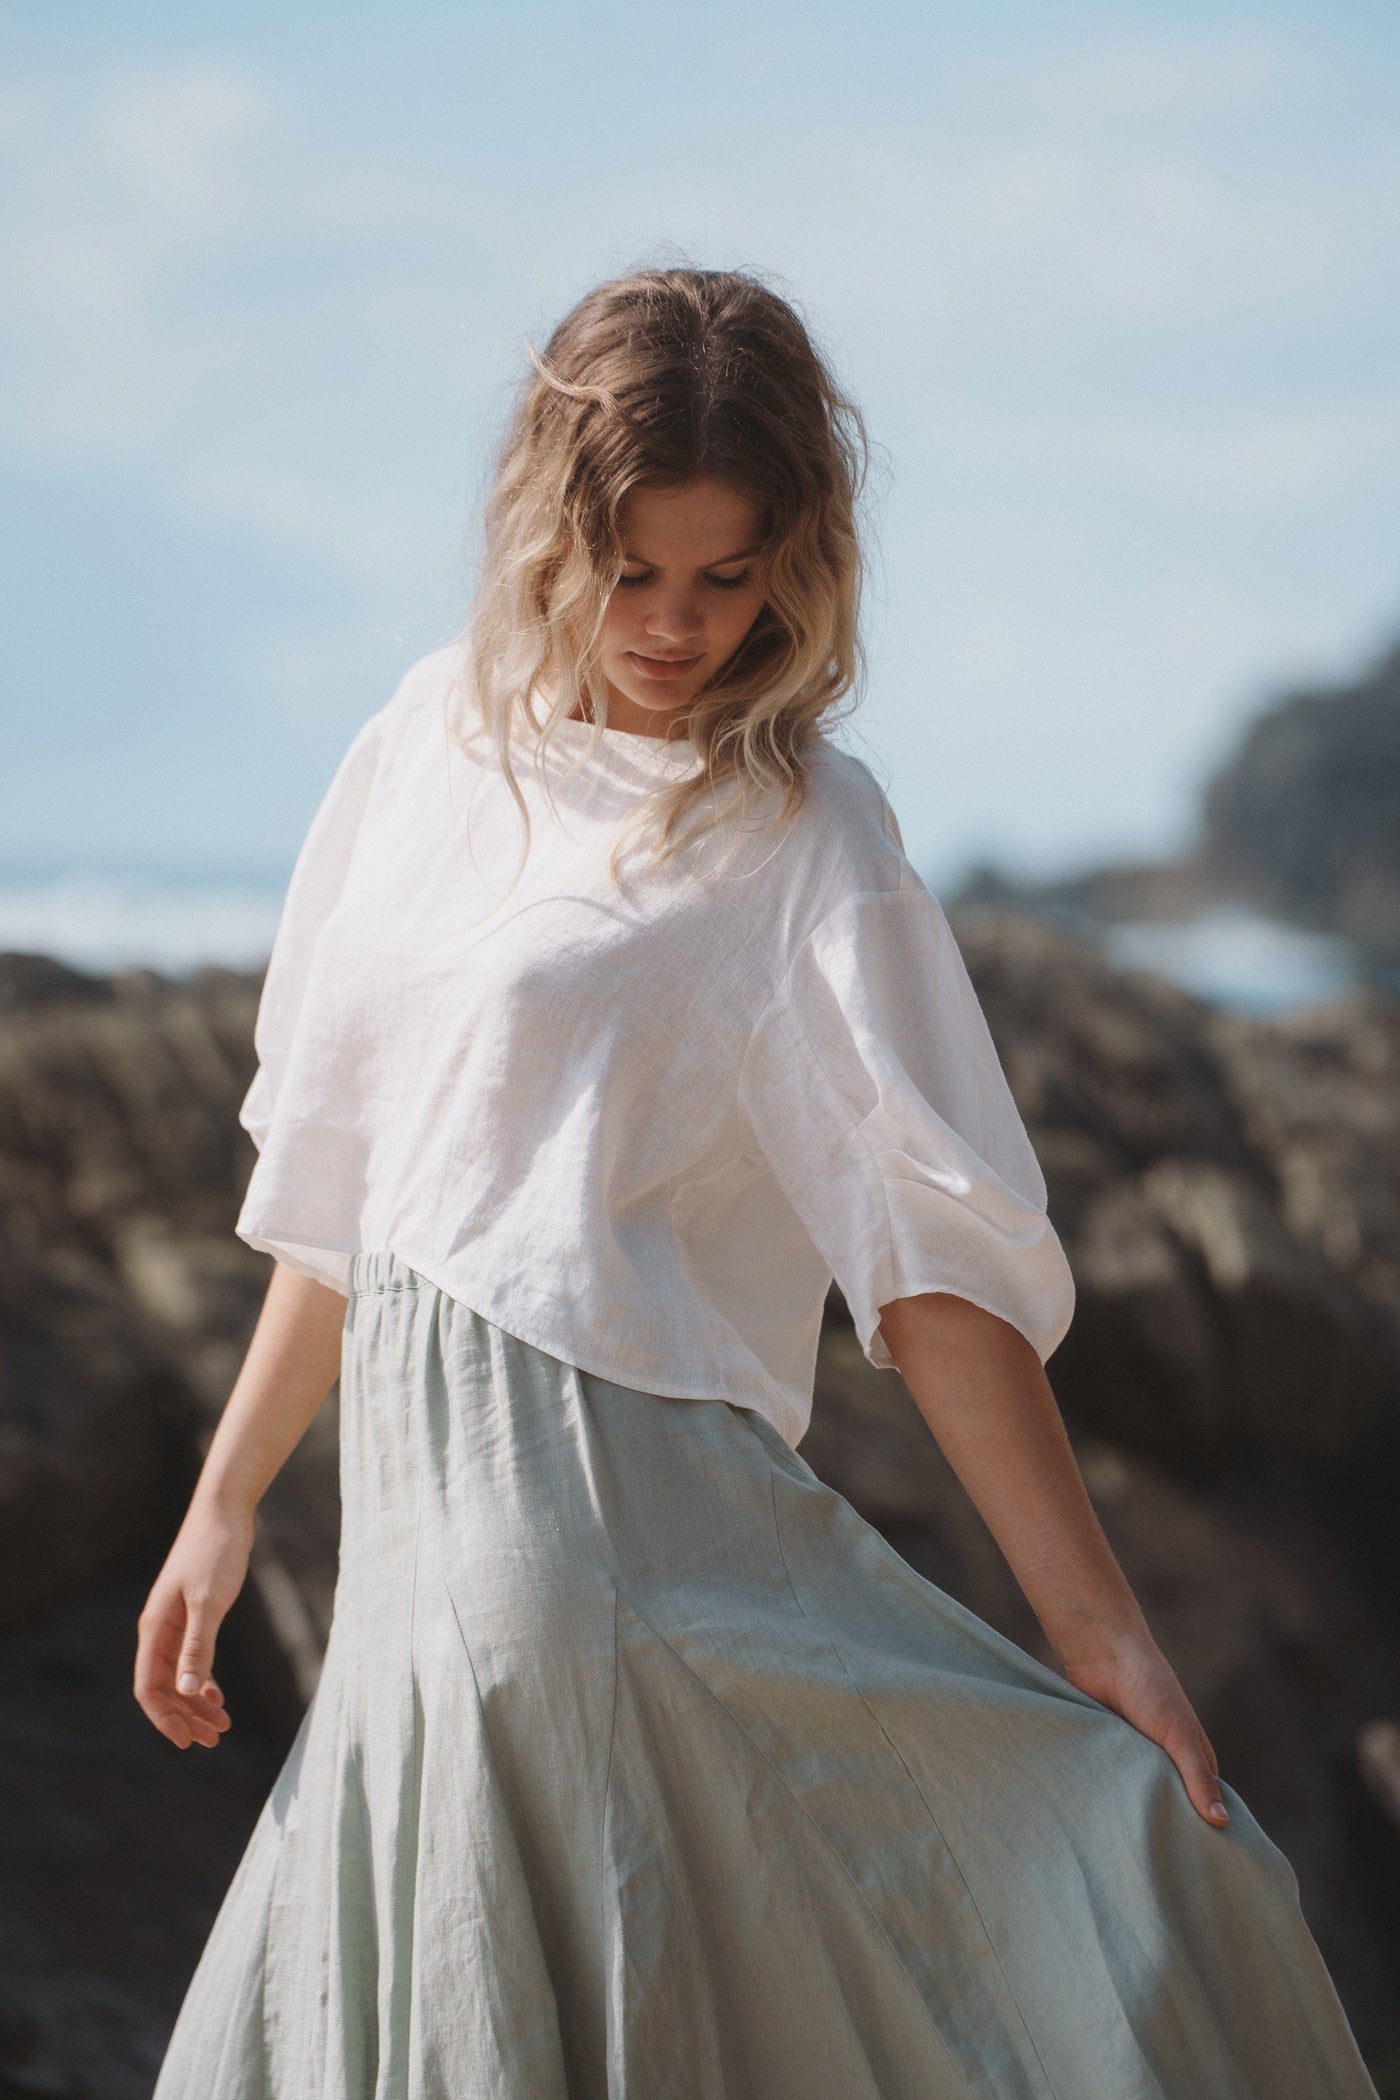 Lilly Pilly Collection 100% organic linen Stella Skirt in Tea